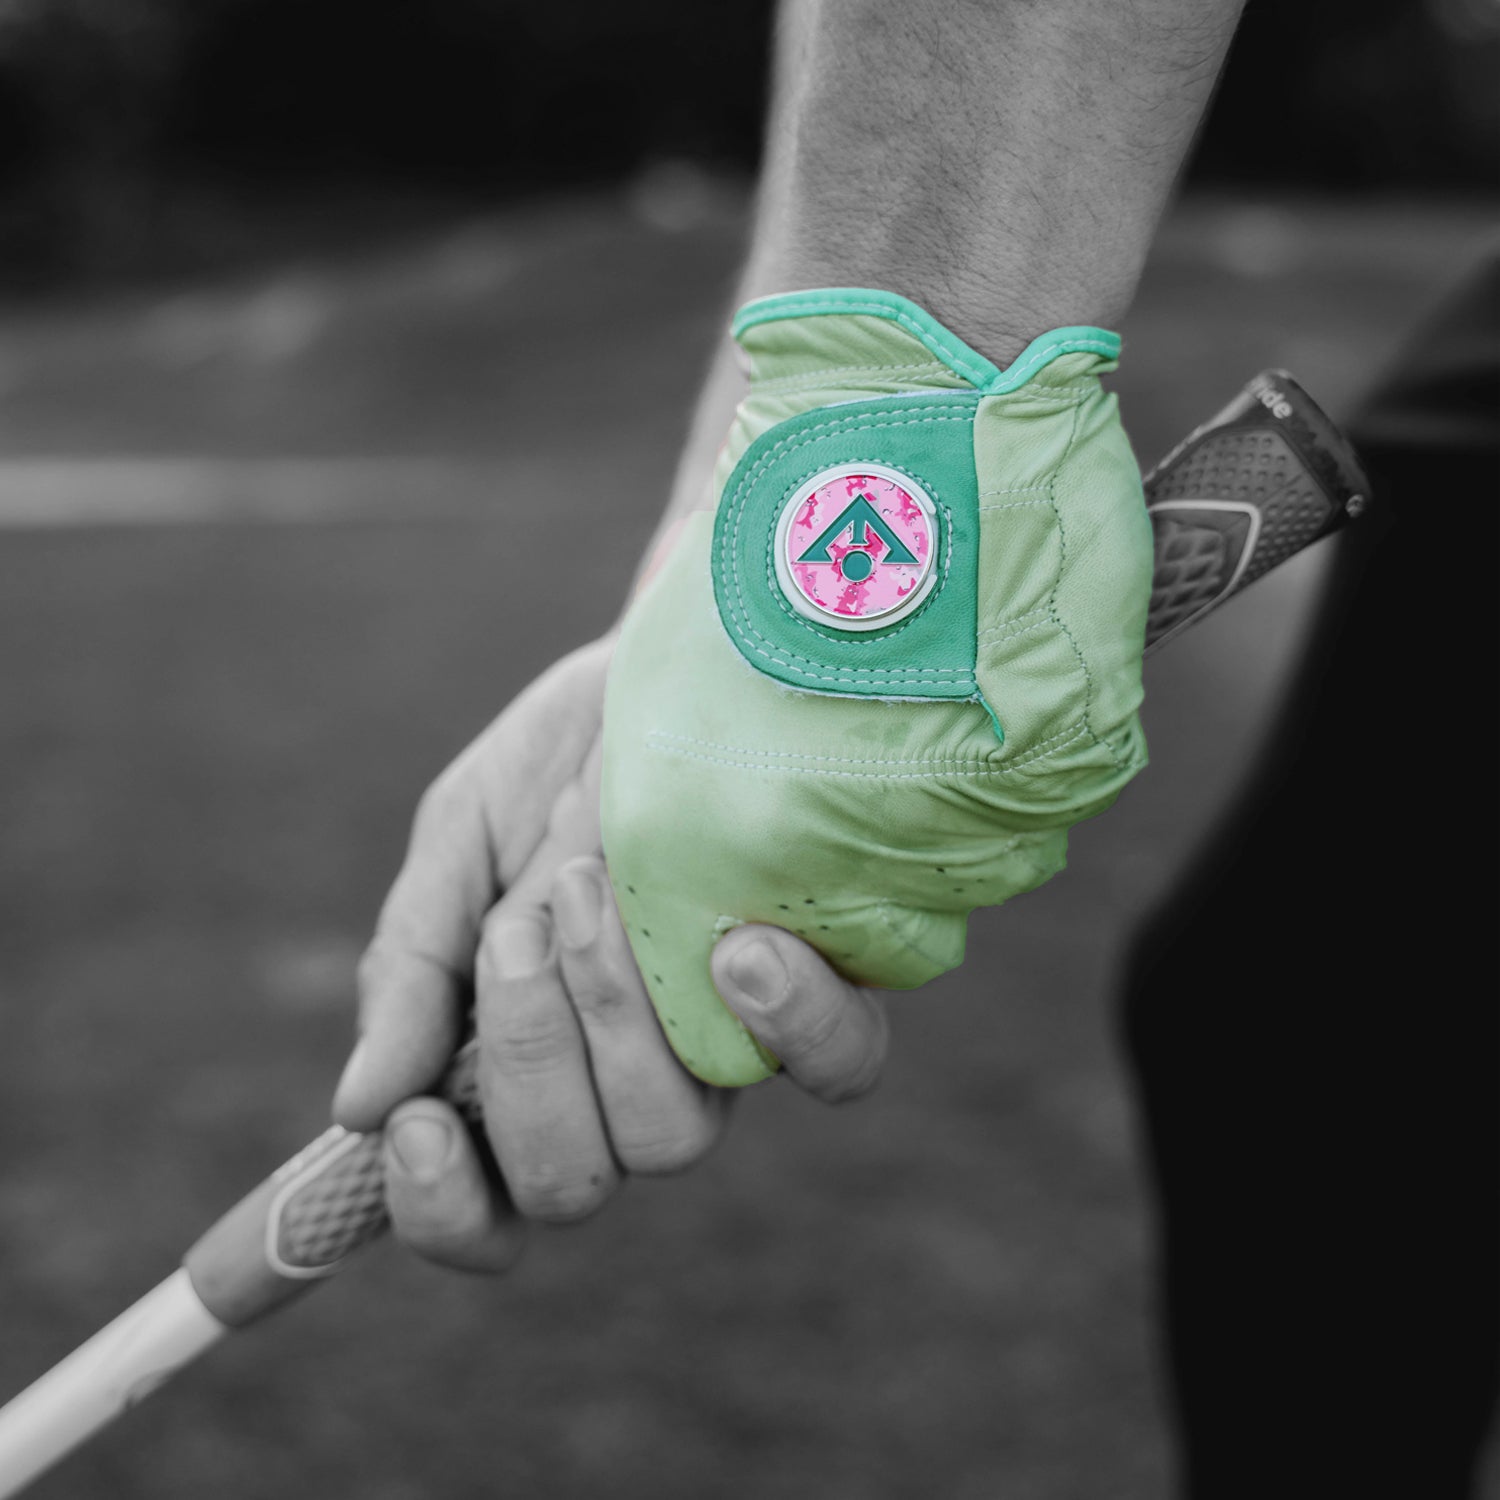 Men's colored golf glove in a seafoam green with a pink magnetic ball marker up close and in black and white background.